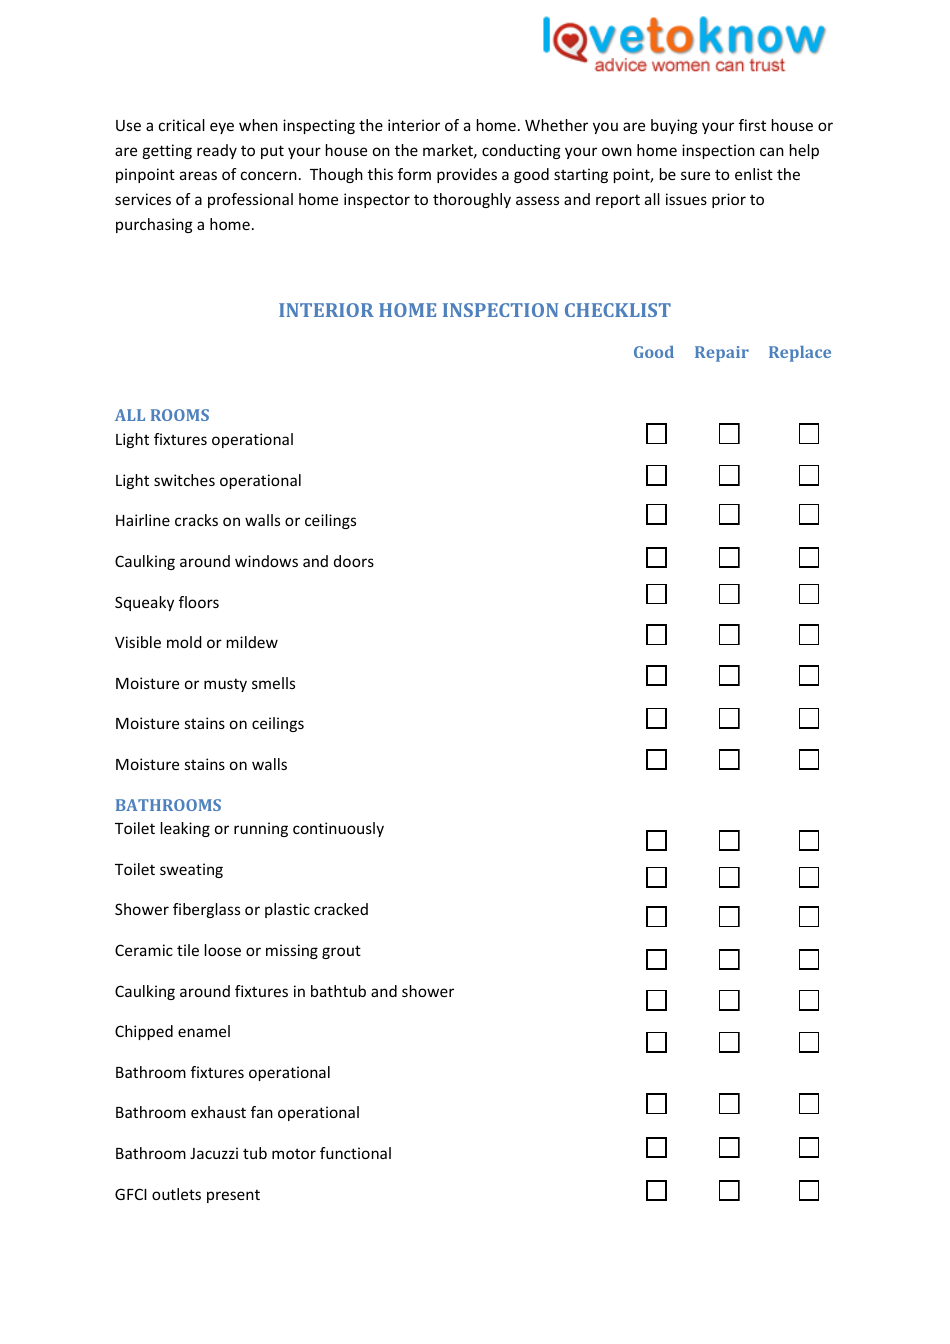 Interior Home Inspection Checklist Template Preview